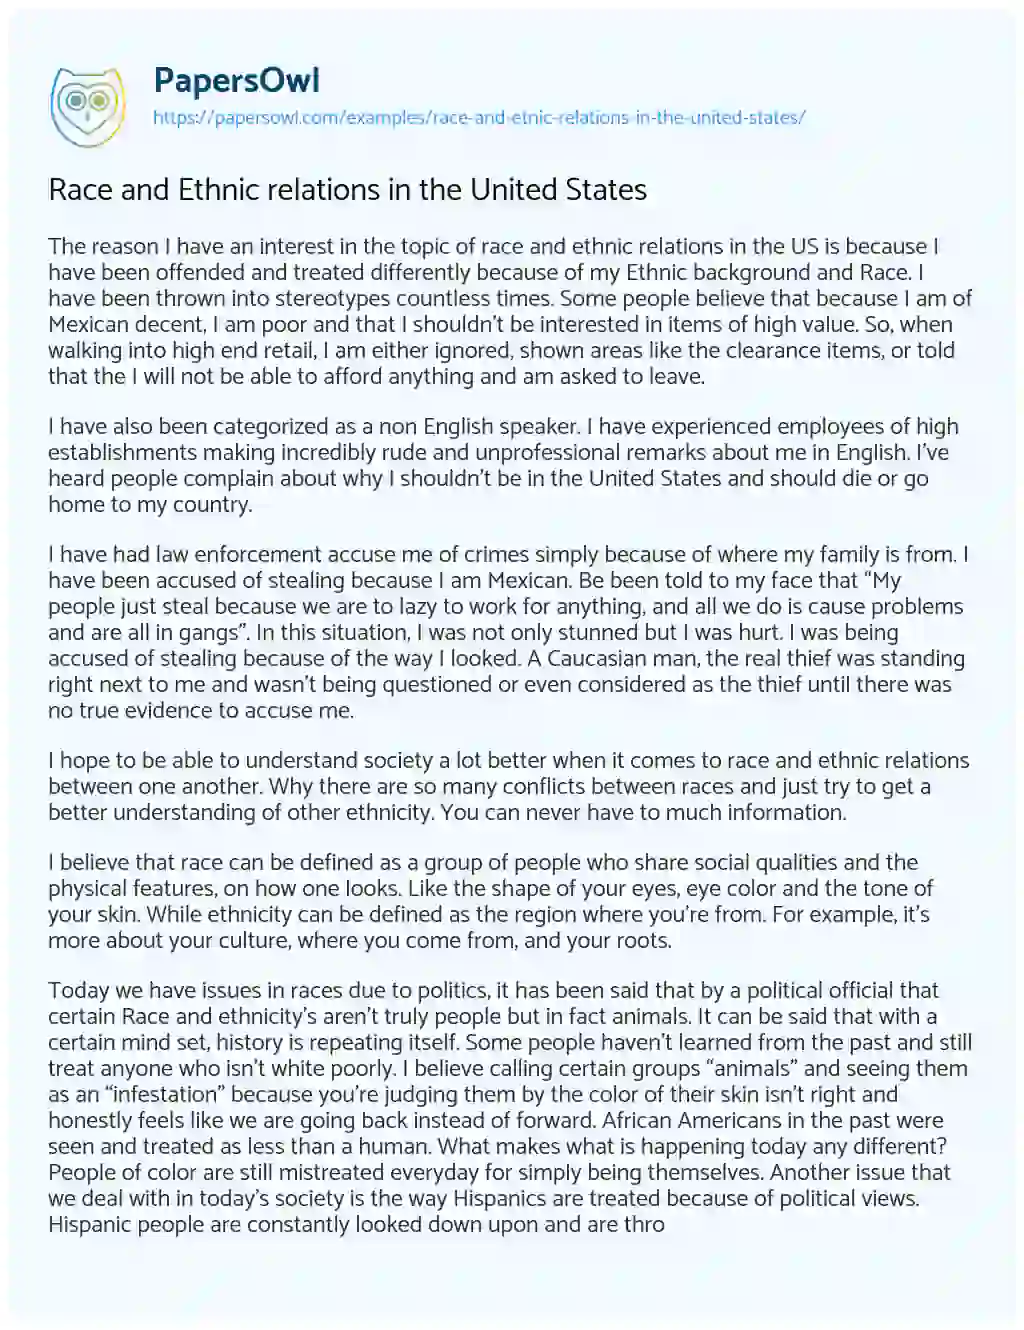 Essay on Race and Ethnic Relations in the United States